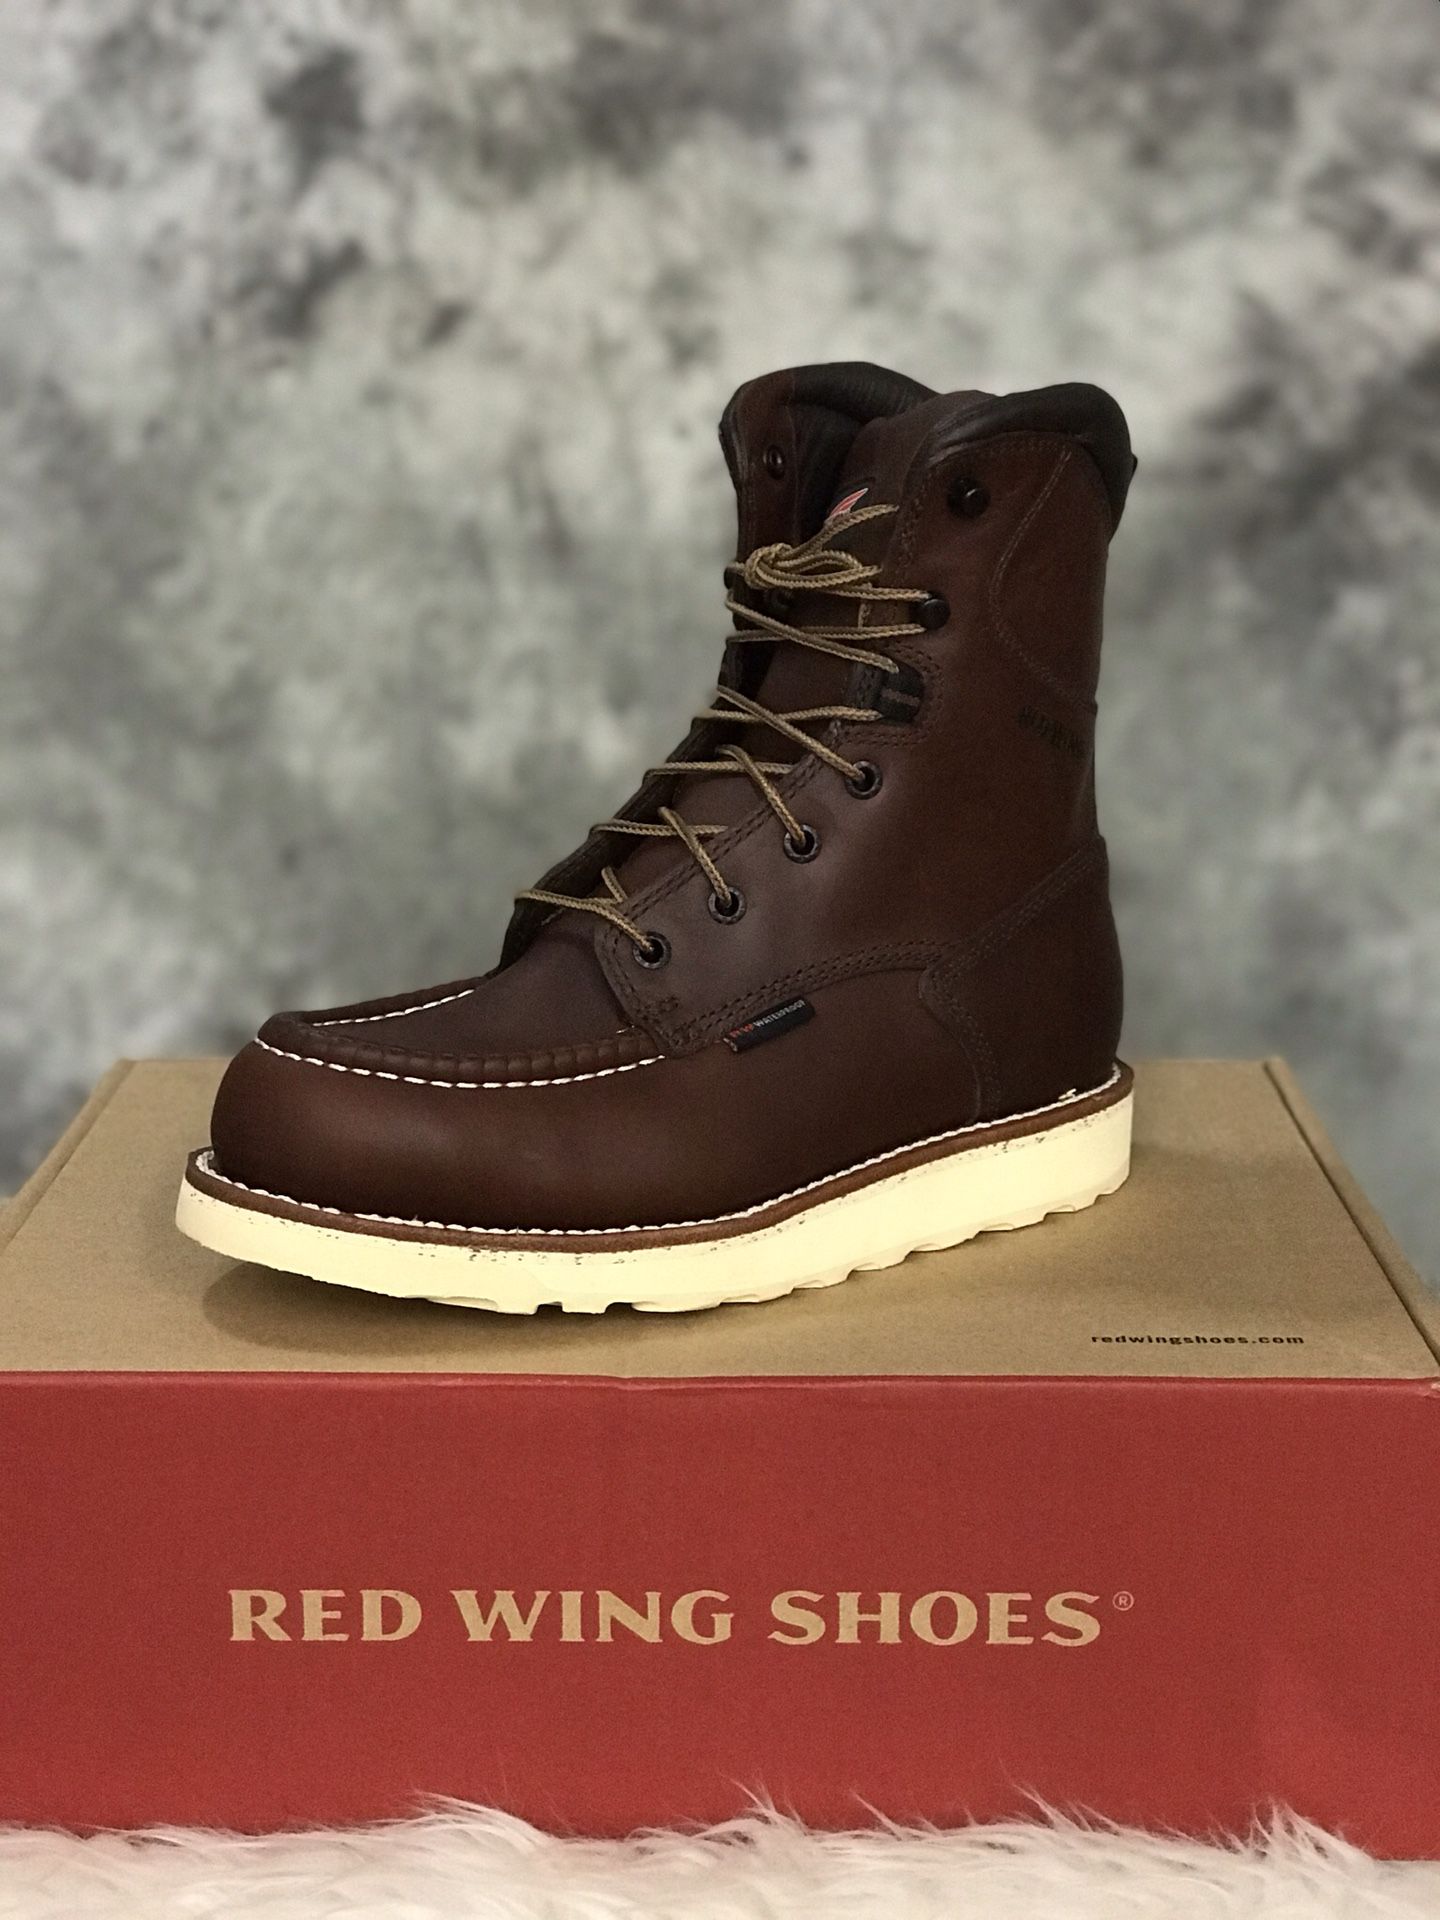 Red Wing Shoes, Boots, Botas, Working Boots